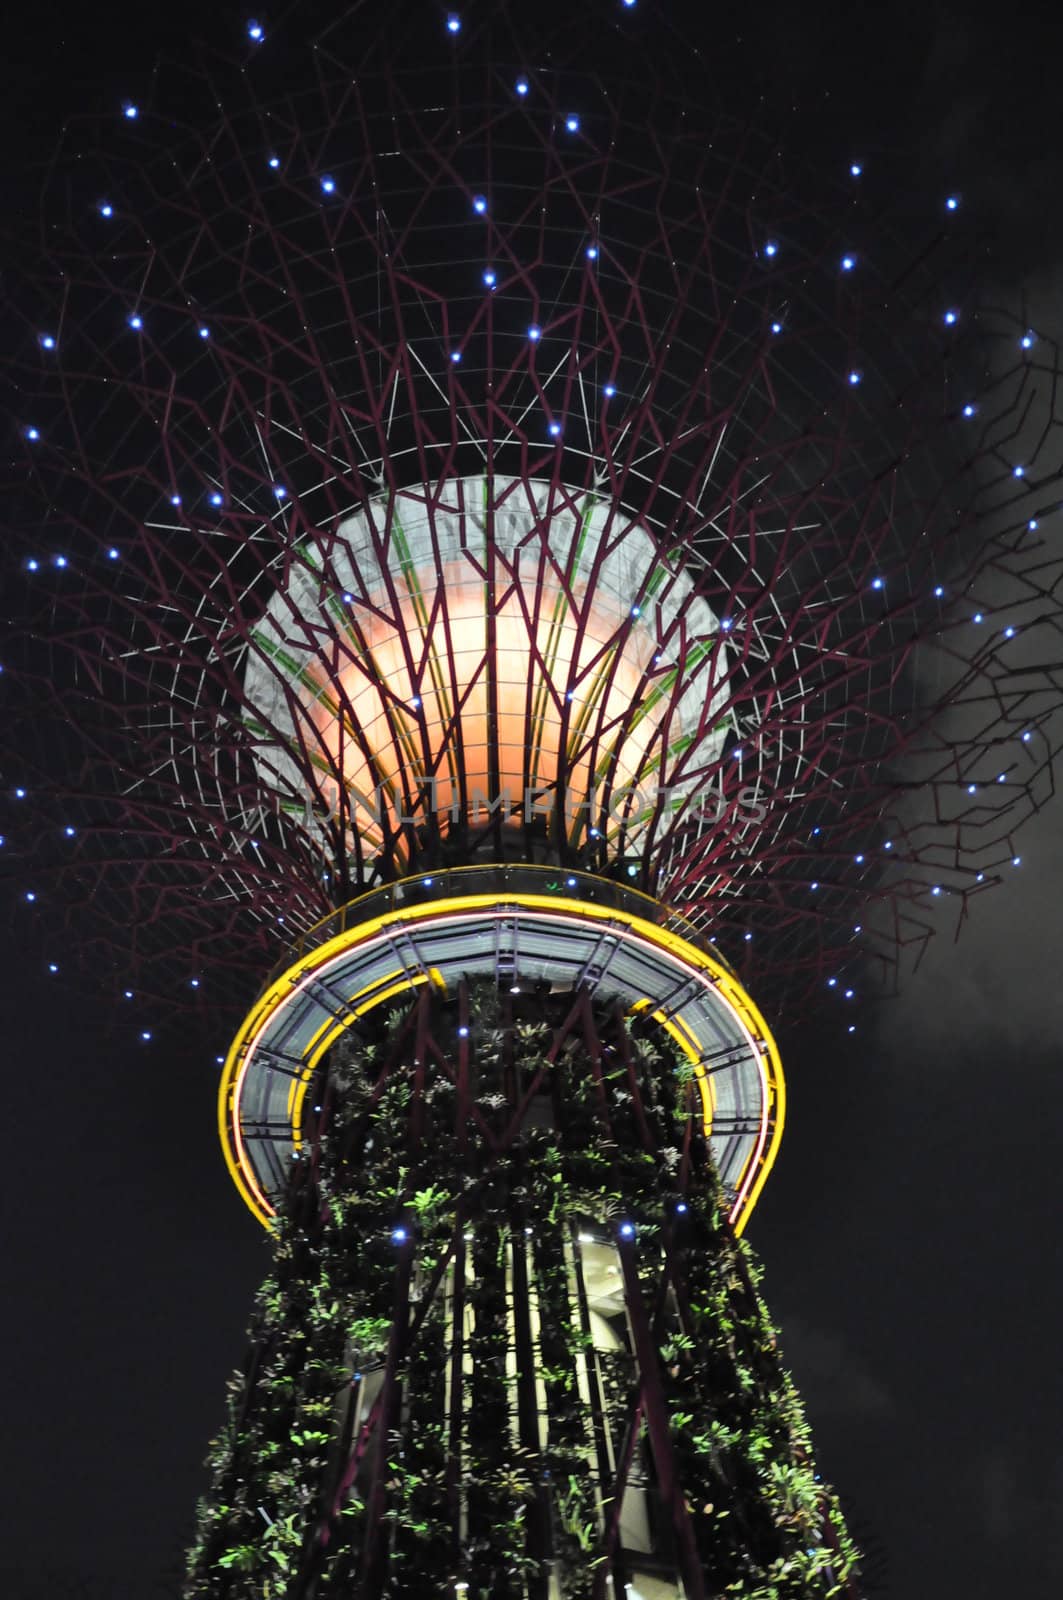 The Supertree Grove at Gardens by the Bay in Singapore by sainaniritu